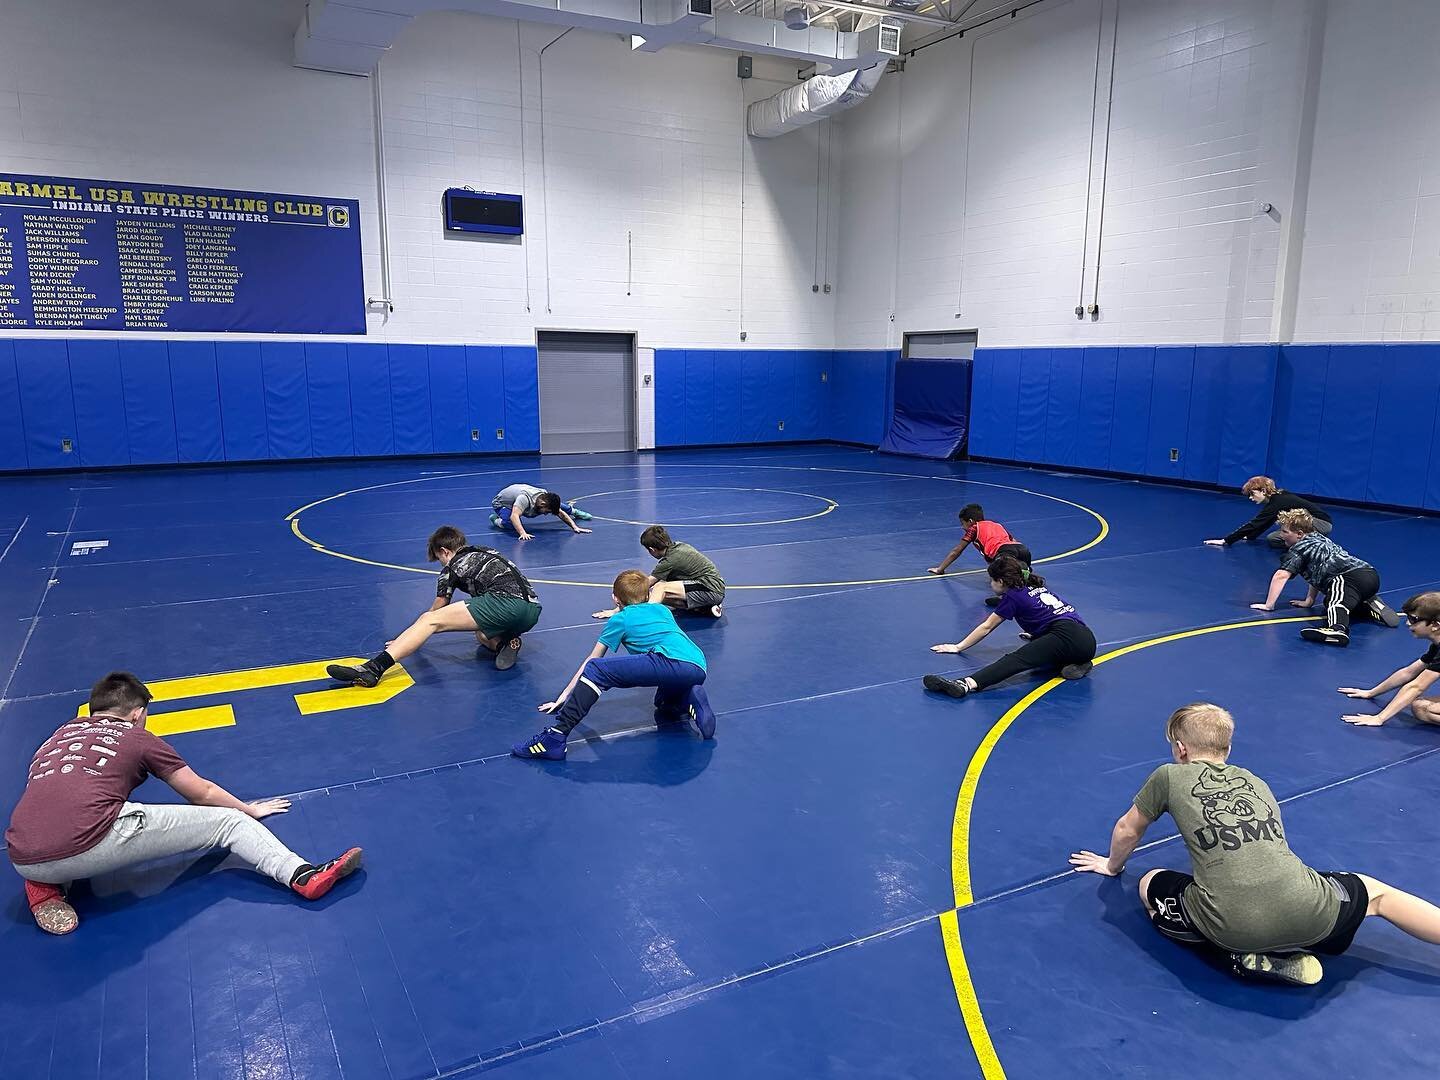 Greyhound&rsquo;s working hard on a Sunday. 

💪🏽 Join us for weekly Greyhound Elite training sessions at the Carmel High School wrestling room on Sundays at 4pm. These sessions are for elementary &amp; middle school athletes; no registration needed